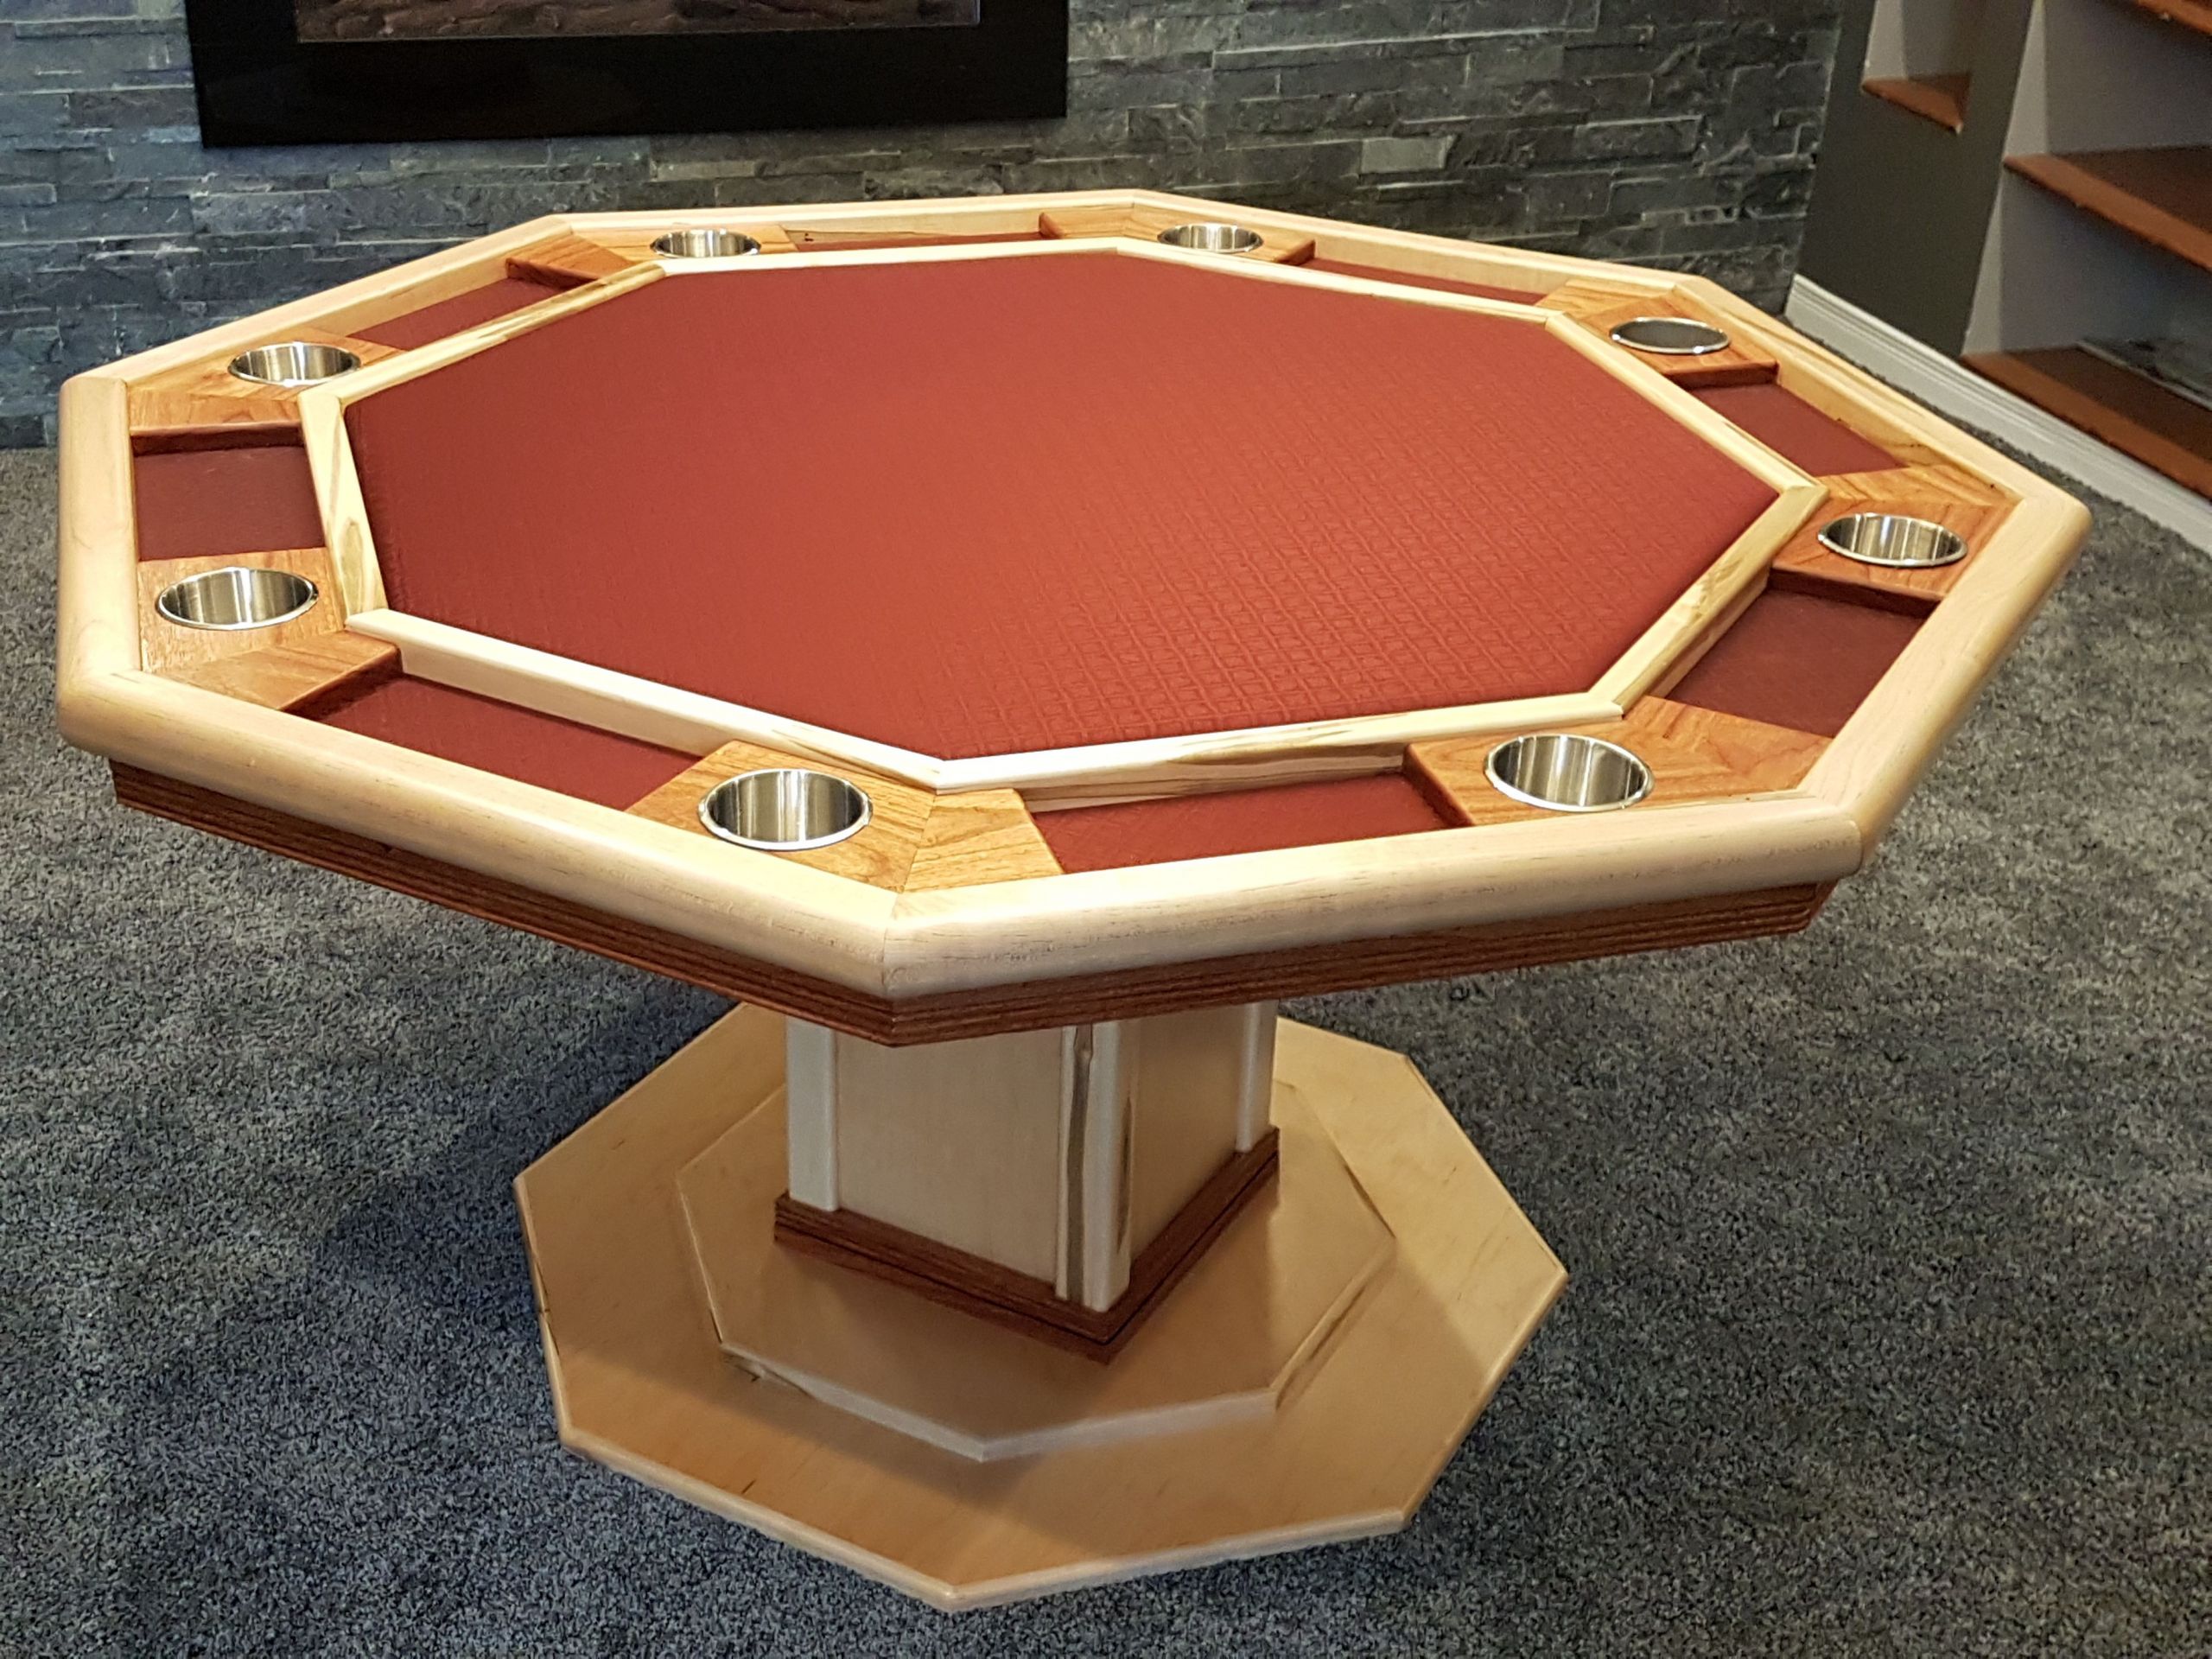 DIY Poker Table Plans
 Octagonal table Ambrosia maple and Canary Wood